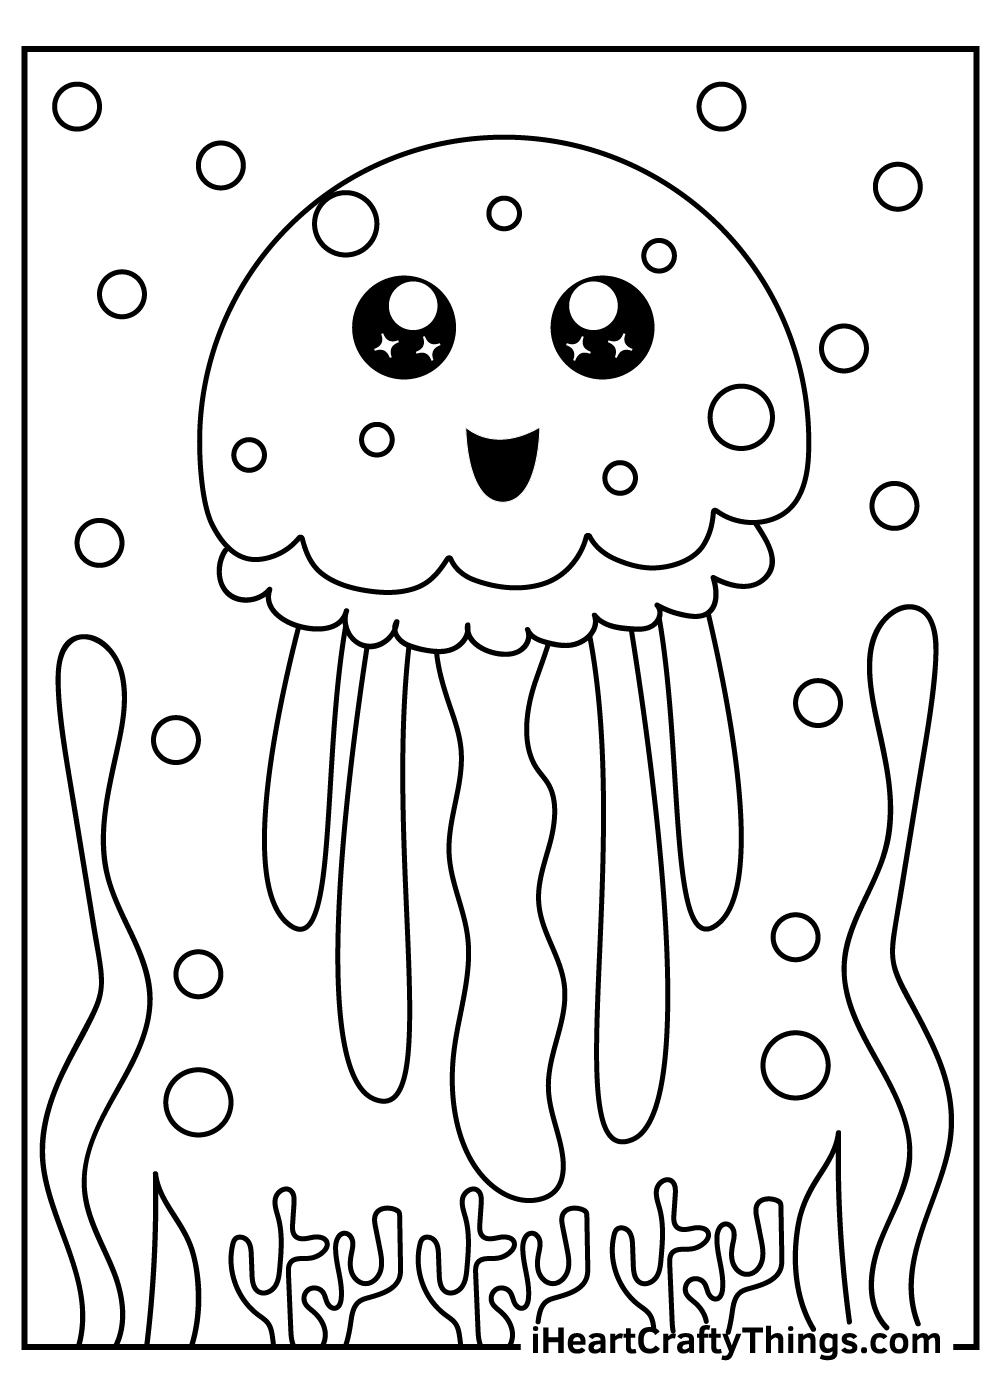 Jellyfish Coloring Pages Updated 20